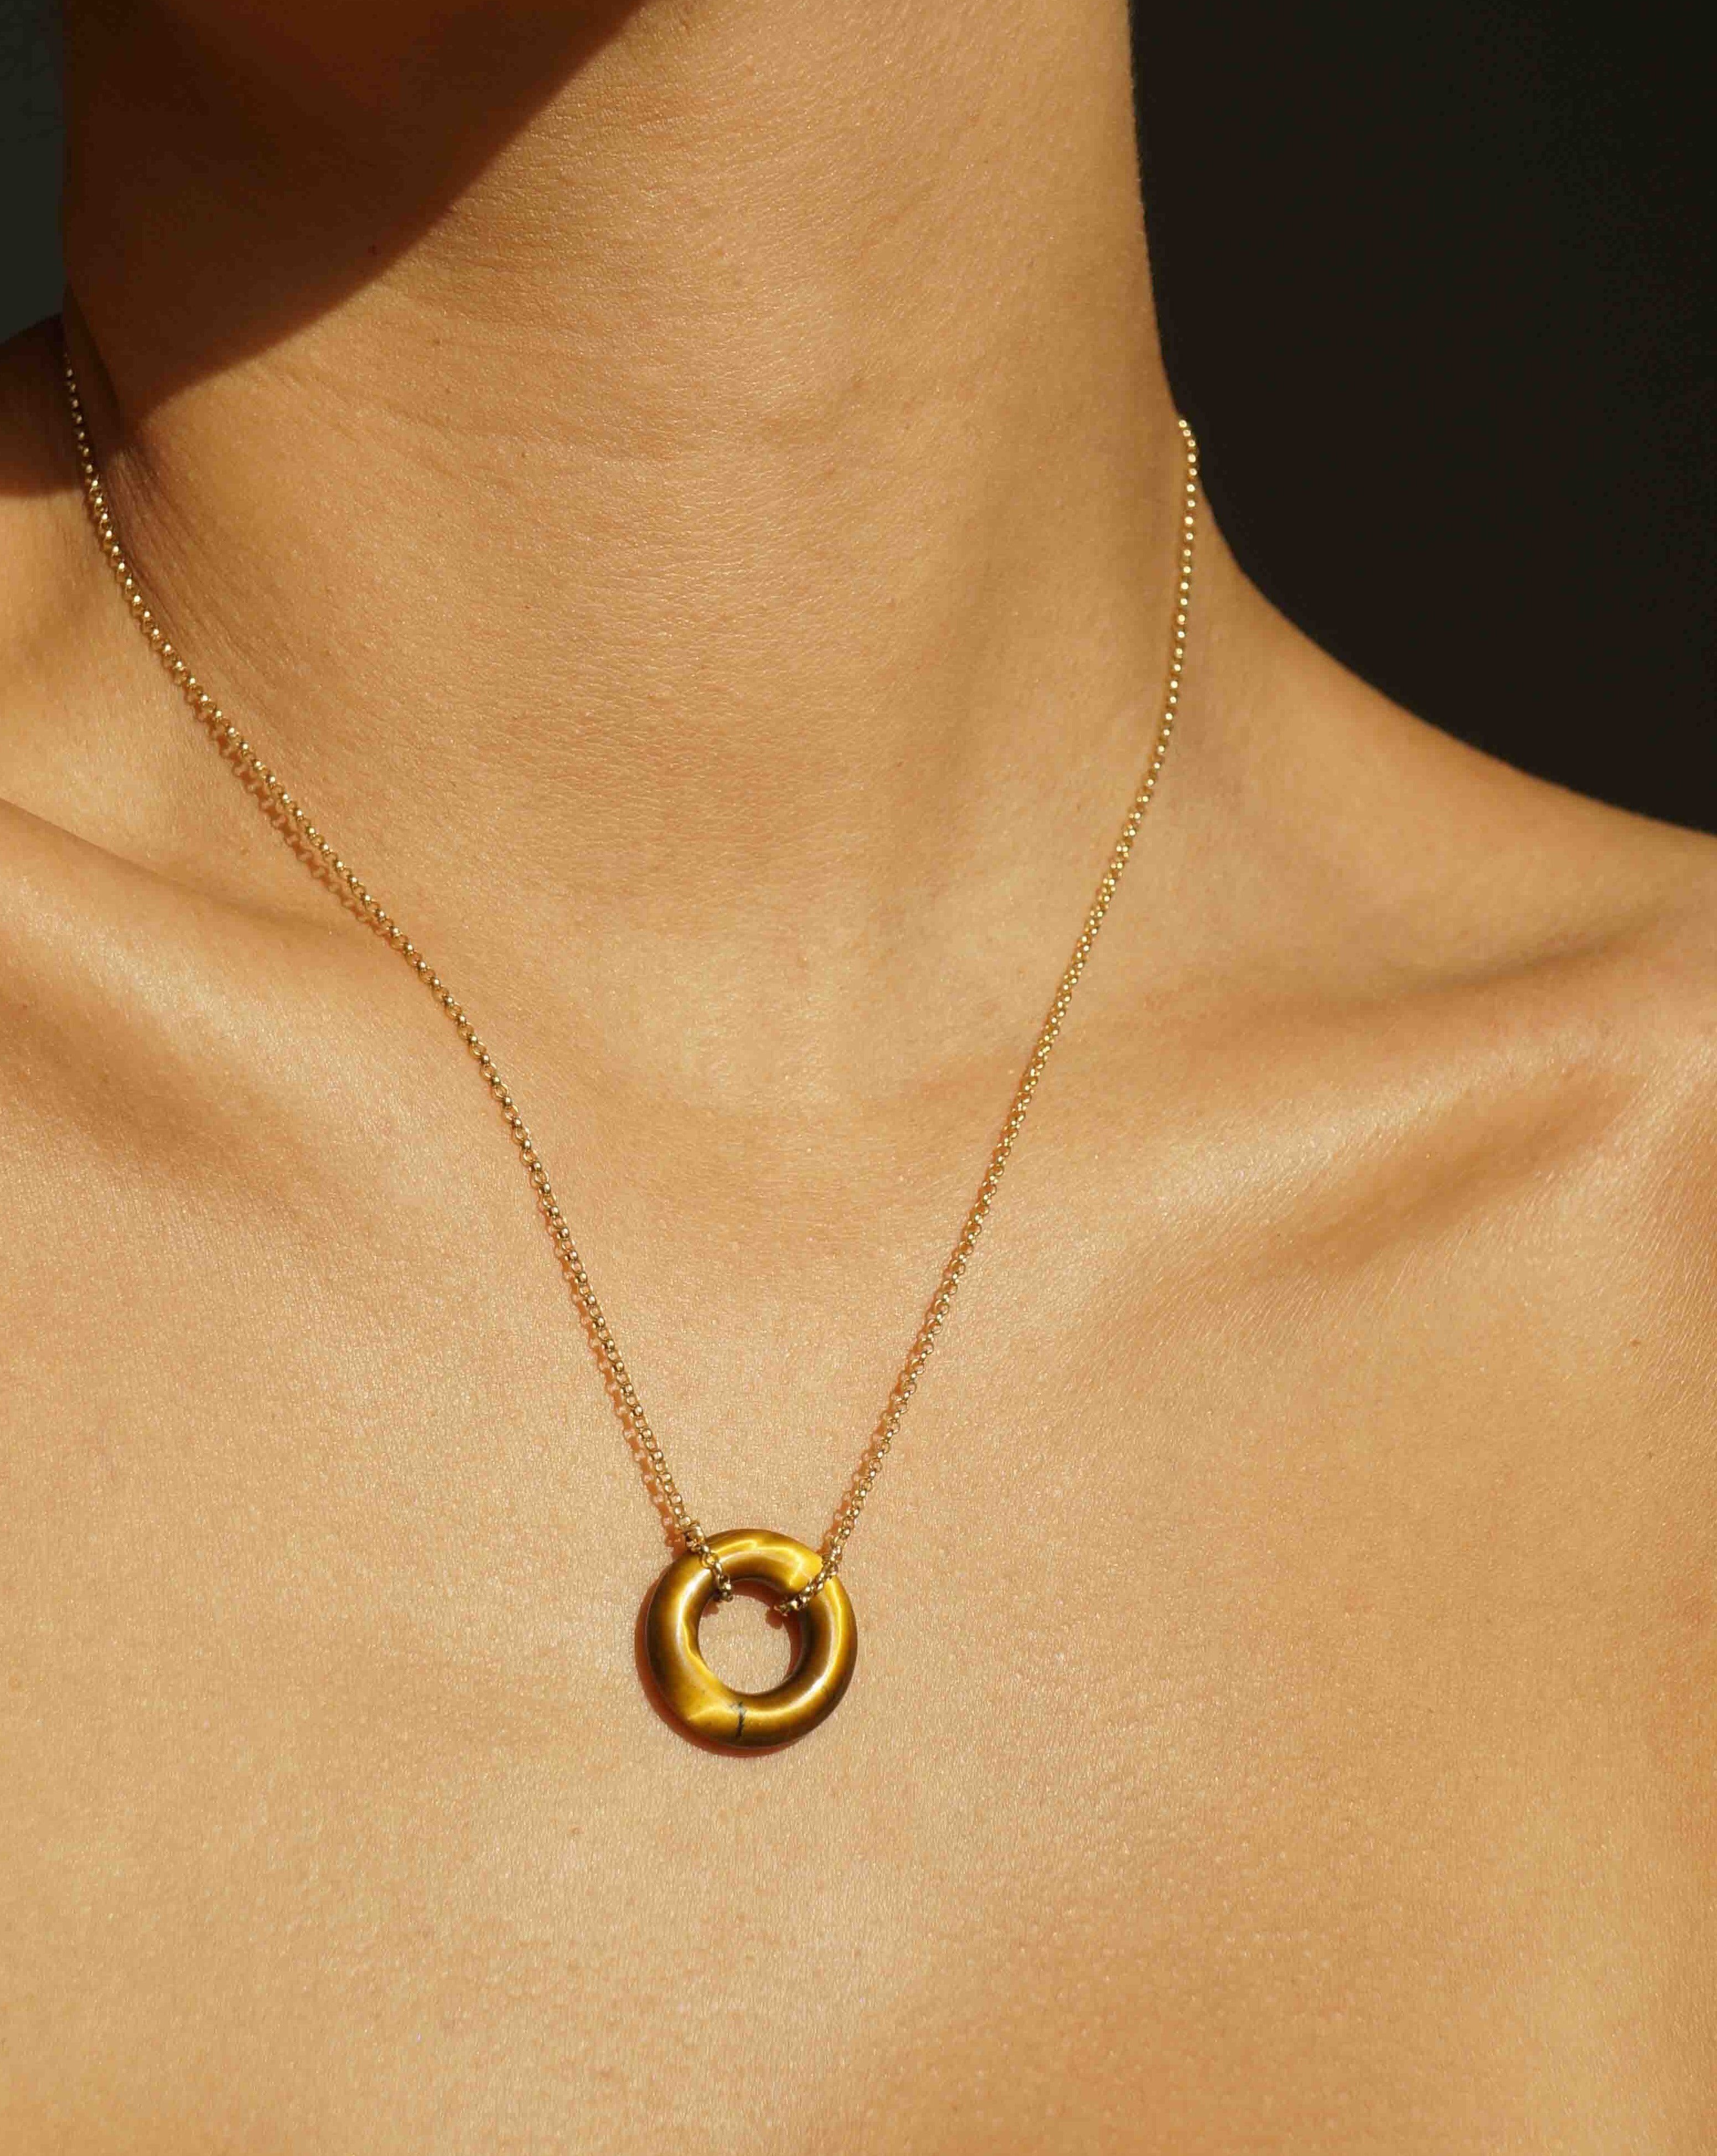 Cerceau Necklace by KOZAKH. A 17 inch long necklace in 14K Gold Filled, featuring a doughnut shape Tiger's Eye gemstone.